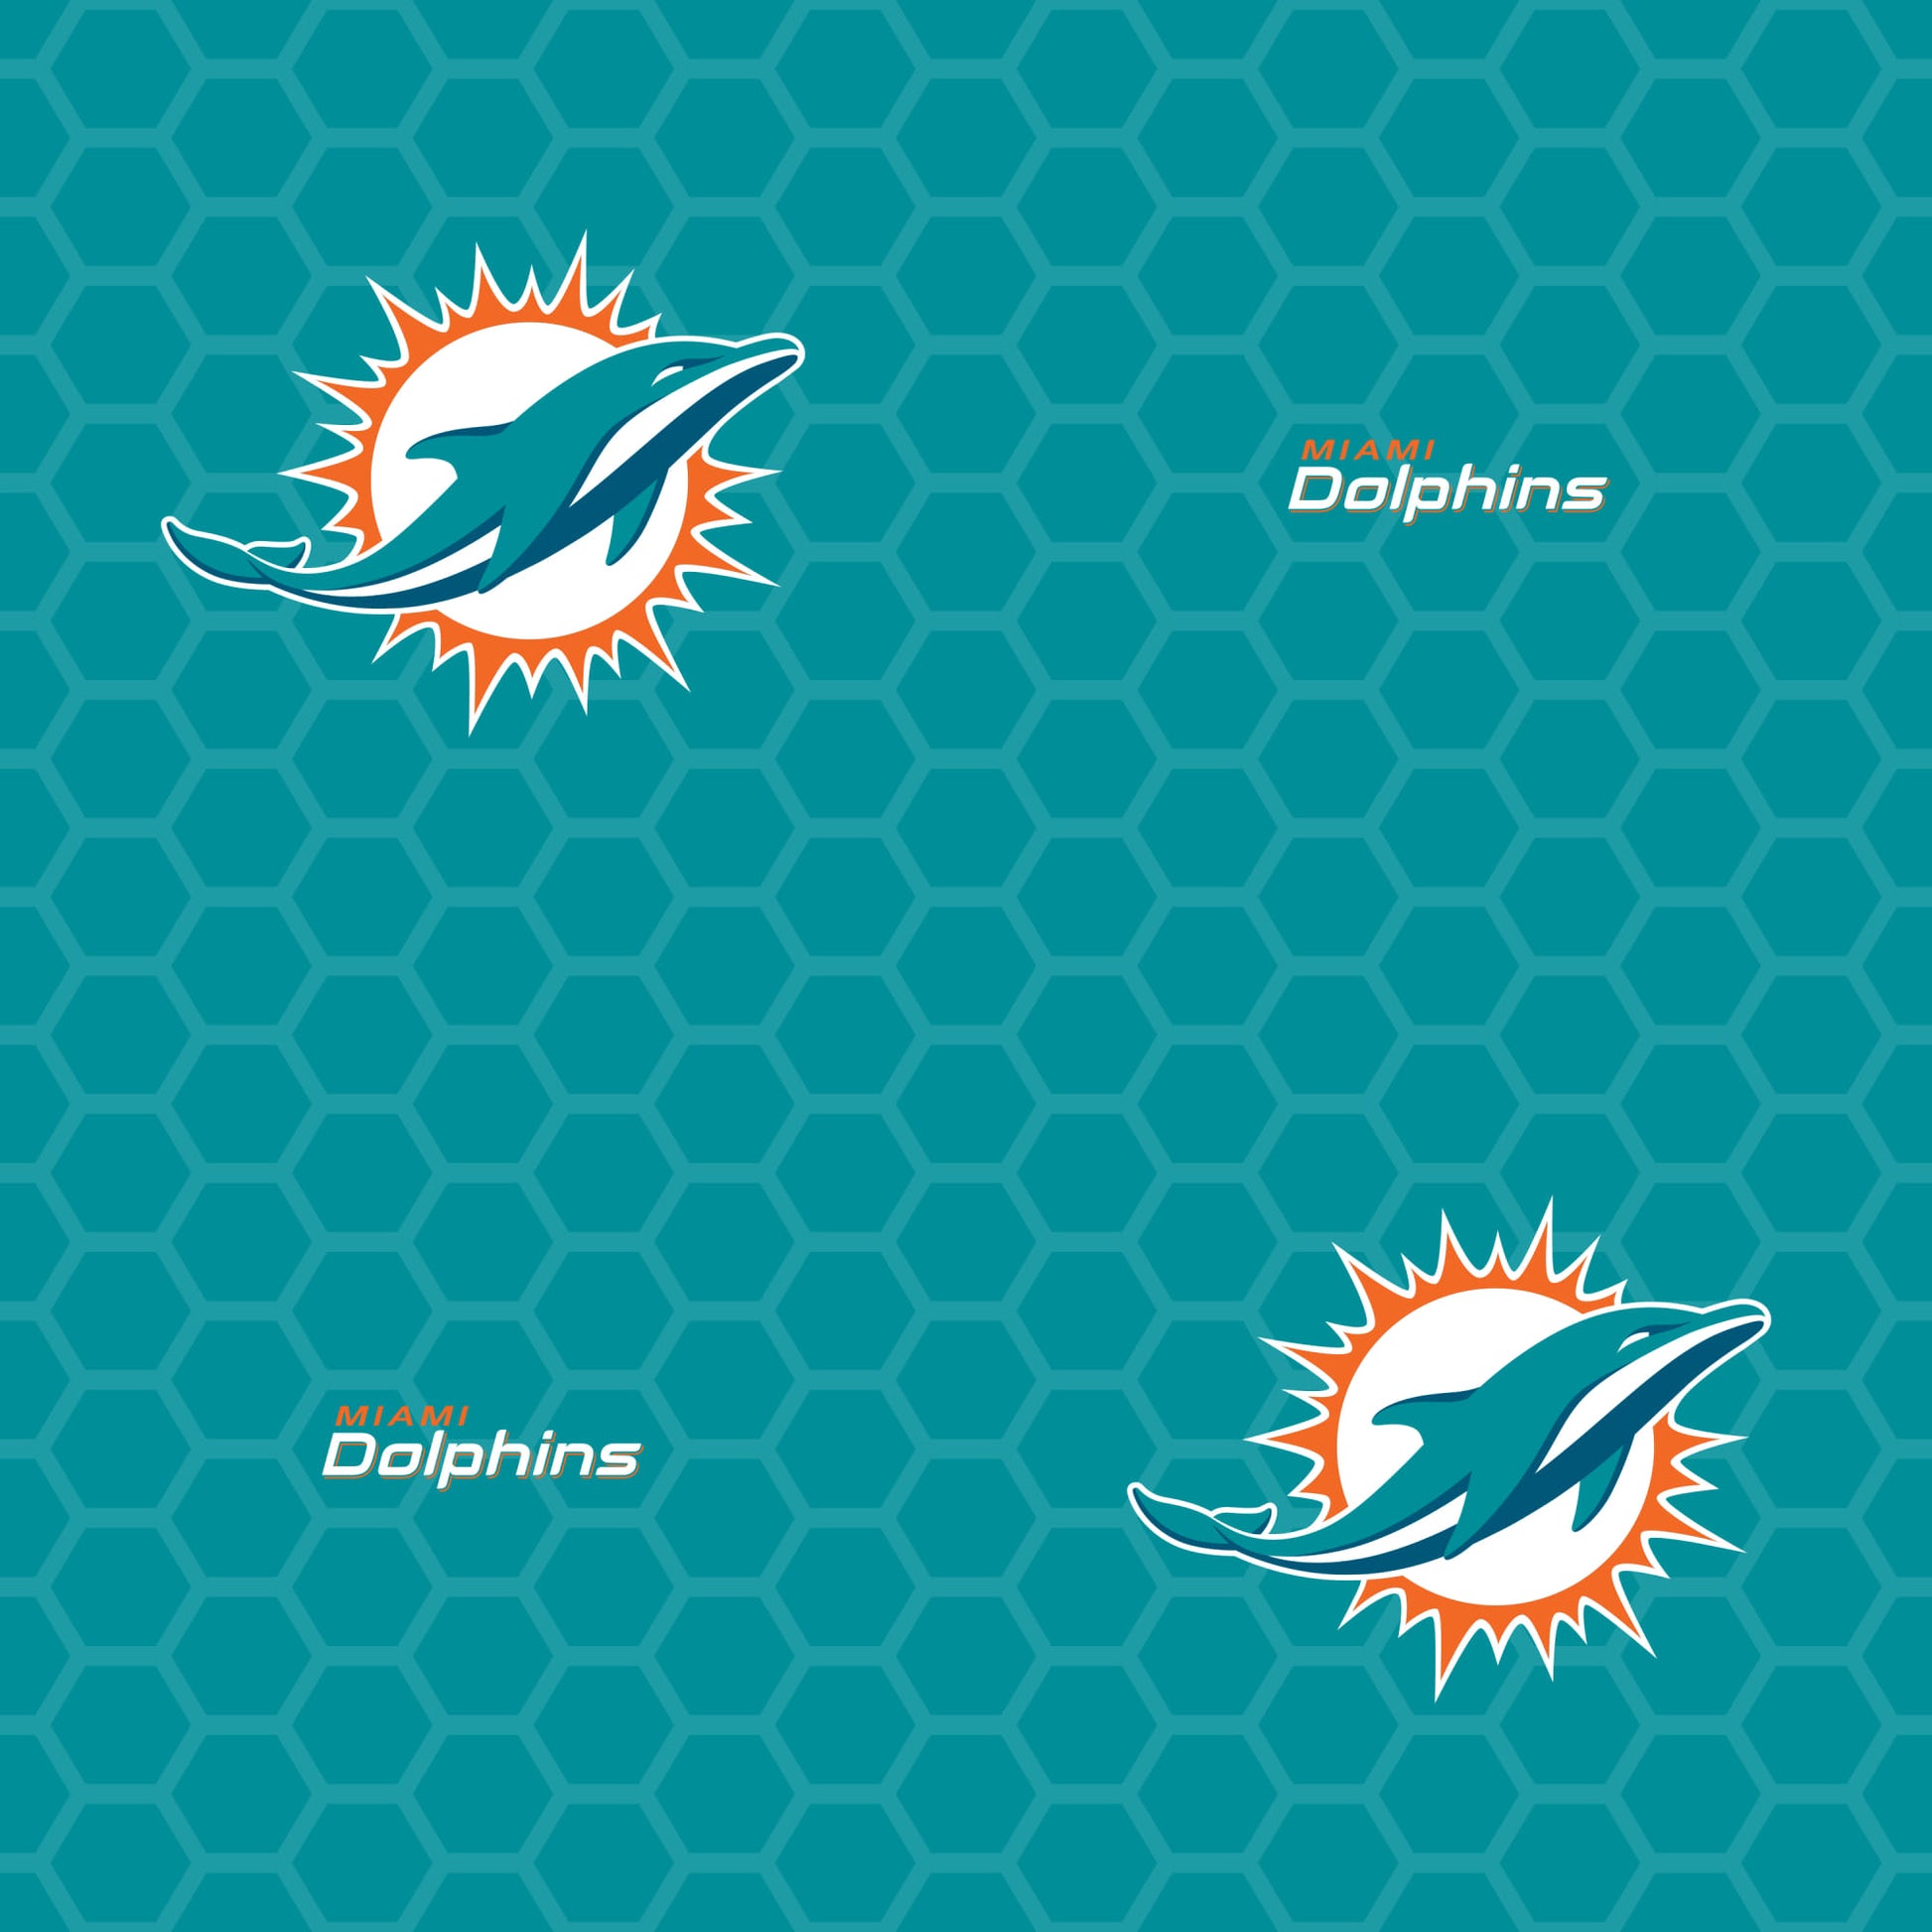 Dolphins Wallpapers  Miami Dolphins - dolphins.com